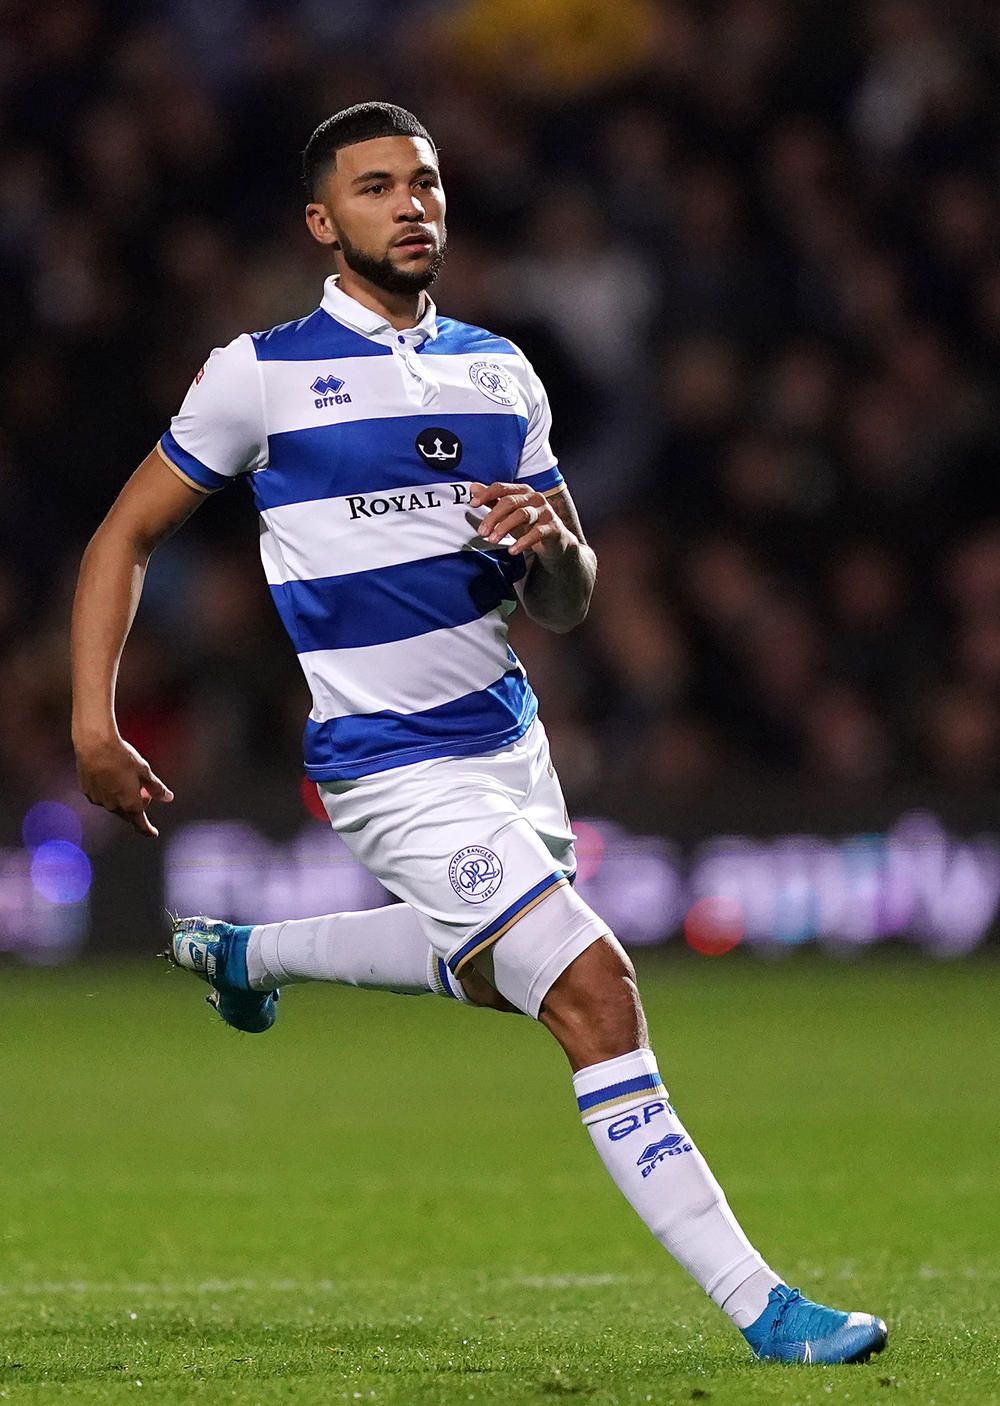 Nahki Wells scores hat-trick as QPR conquer Cardiff | FourFourTwo